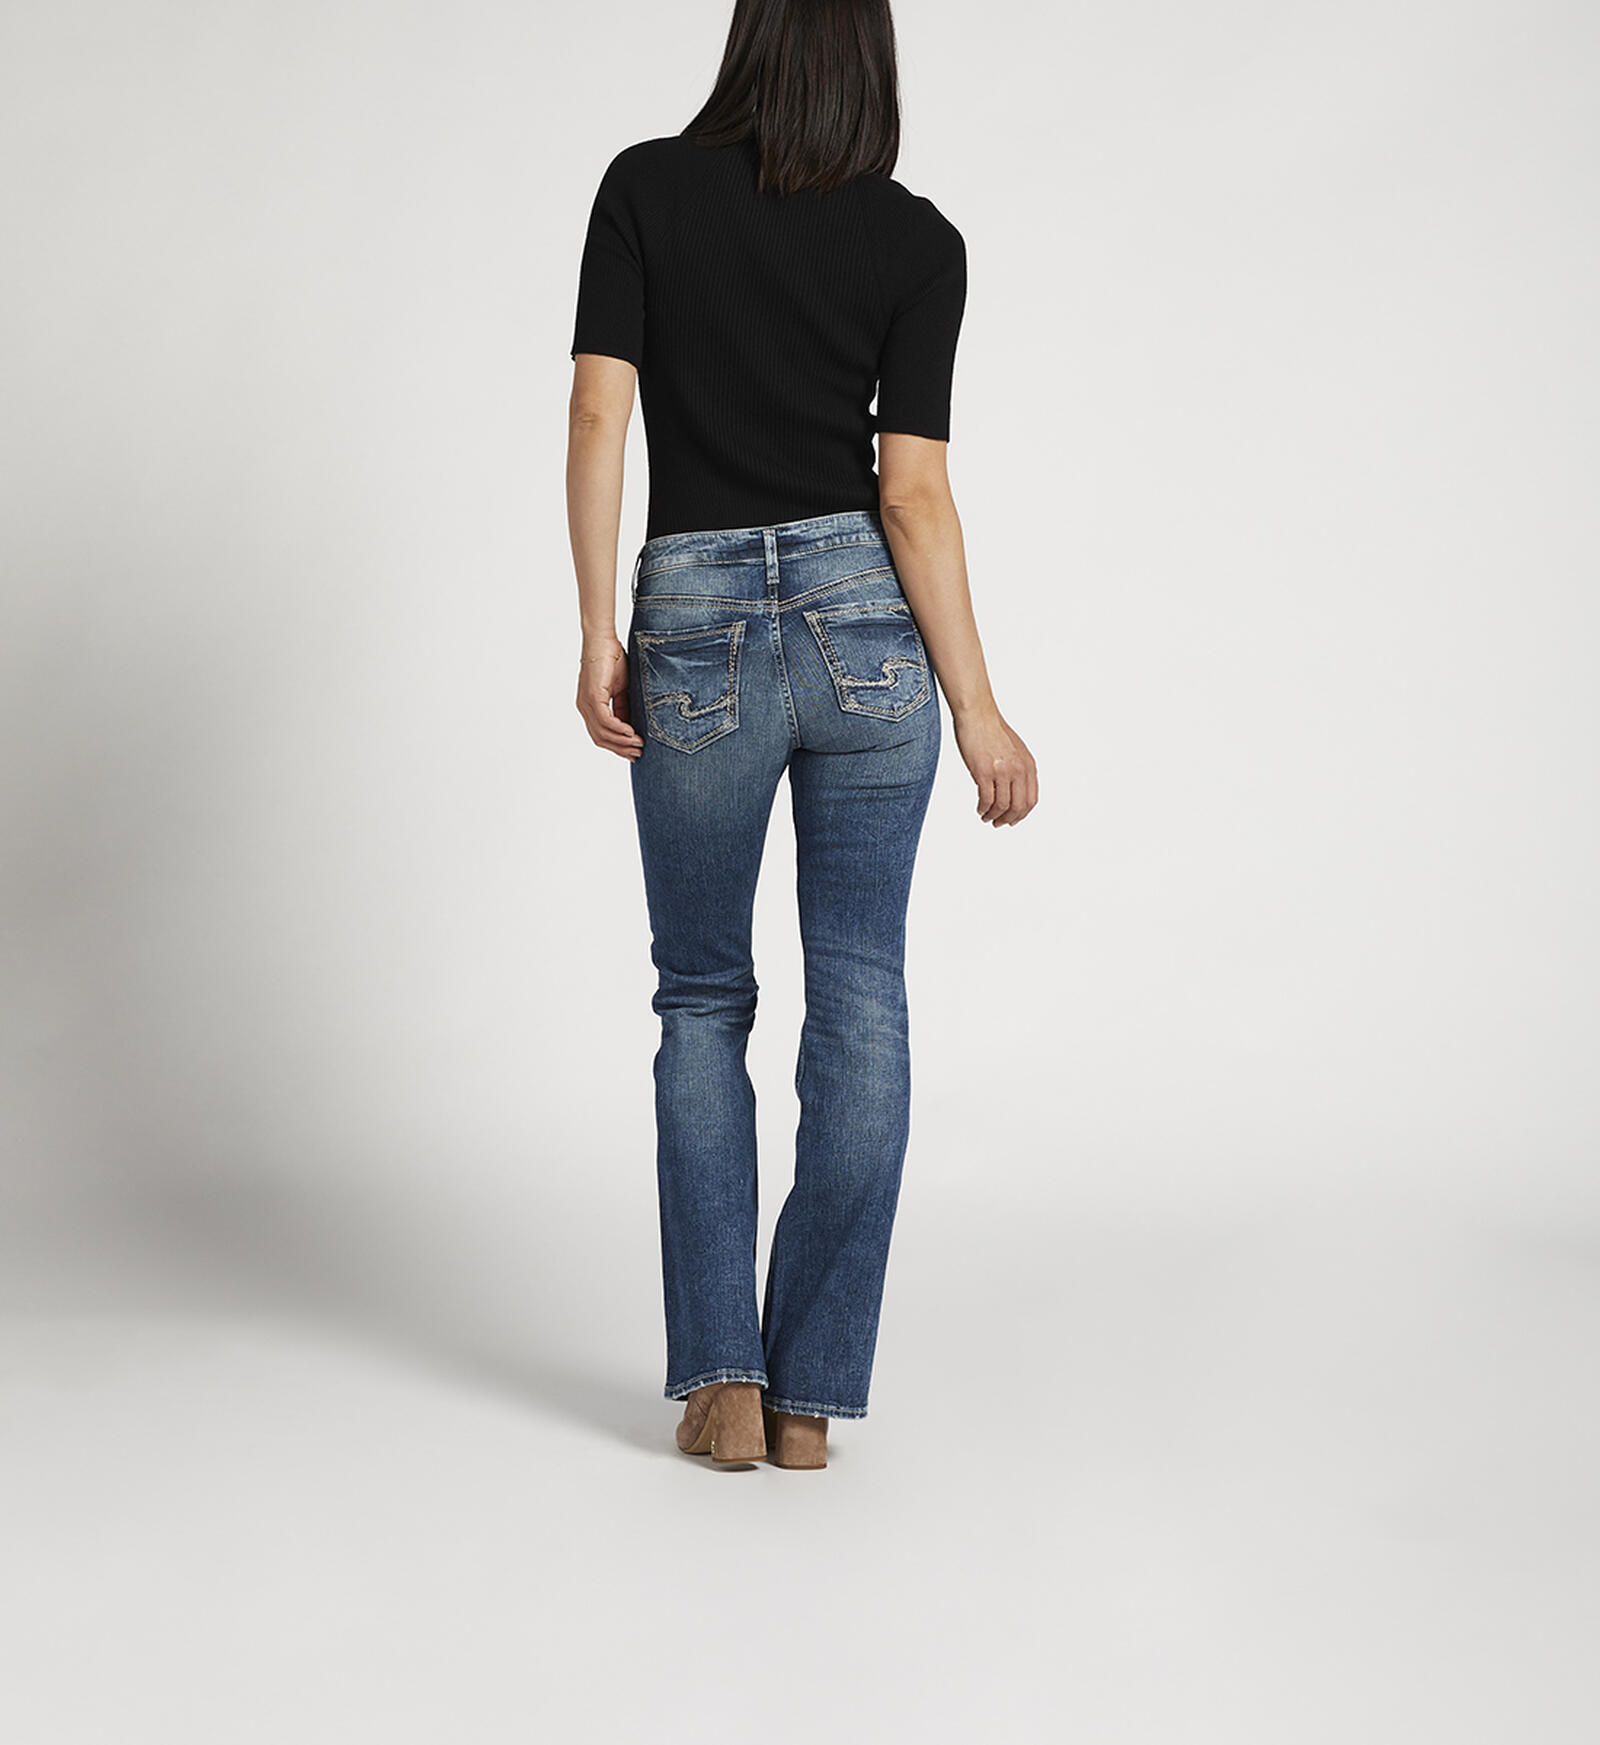 Buy Suki Mid Rise Bootcut Jeans for CAD 108.00